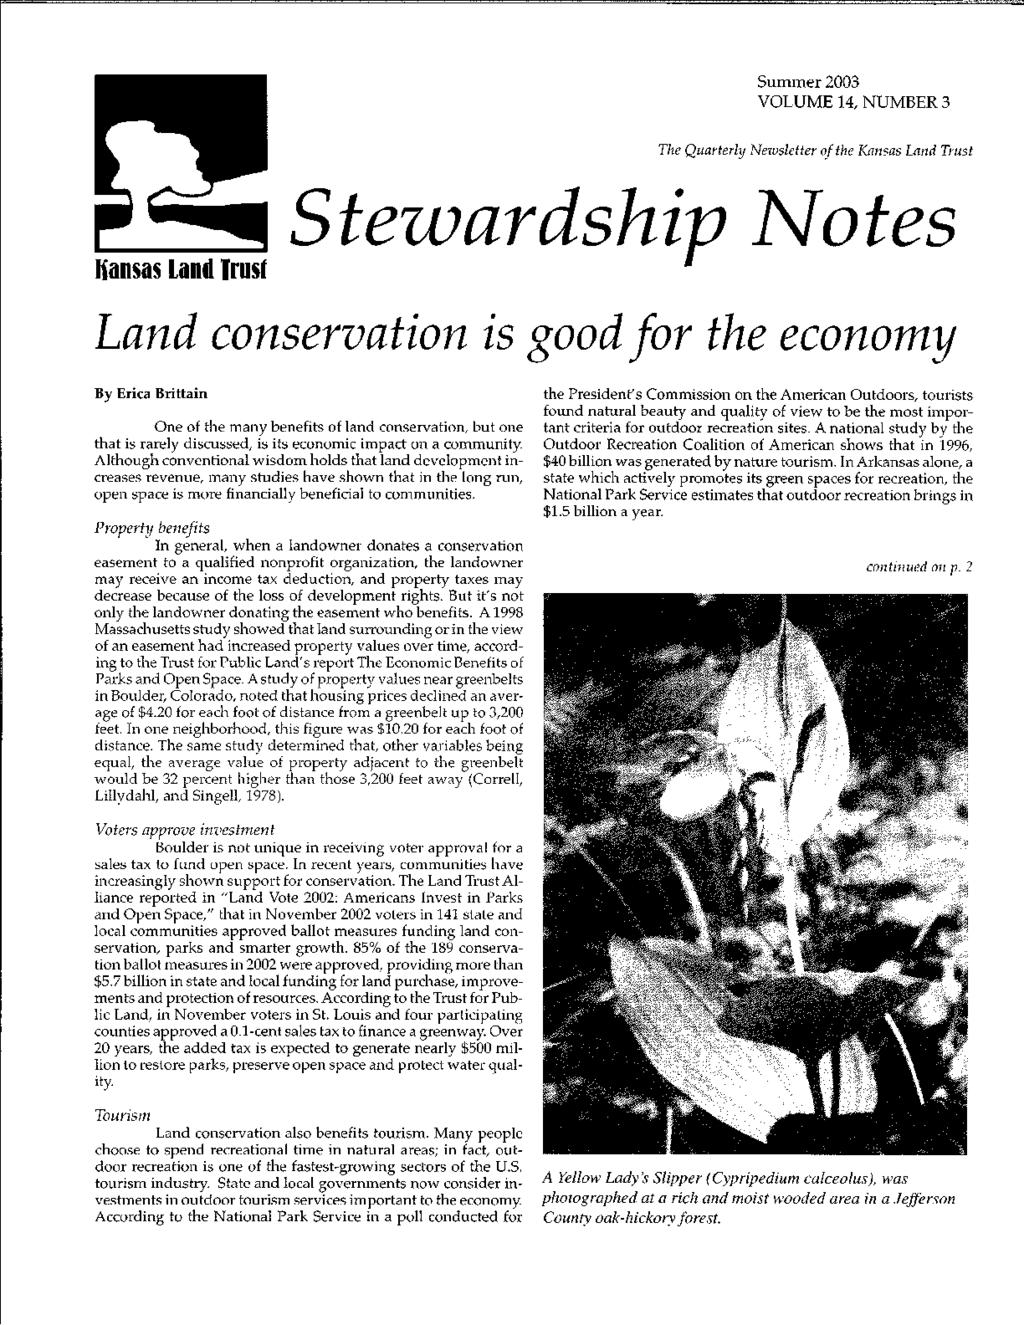 Summer 2003 VOLUME 14, NUMBER 3 The Quarterly Newsletter of the Kansas Land Trust Hansas Land Trust tewardship Dtes Land conservation is good for the economy By Erica Brittain One of the many